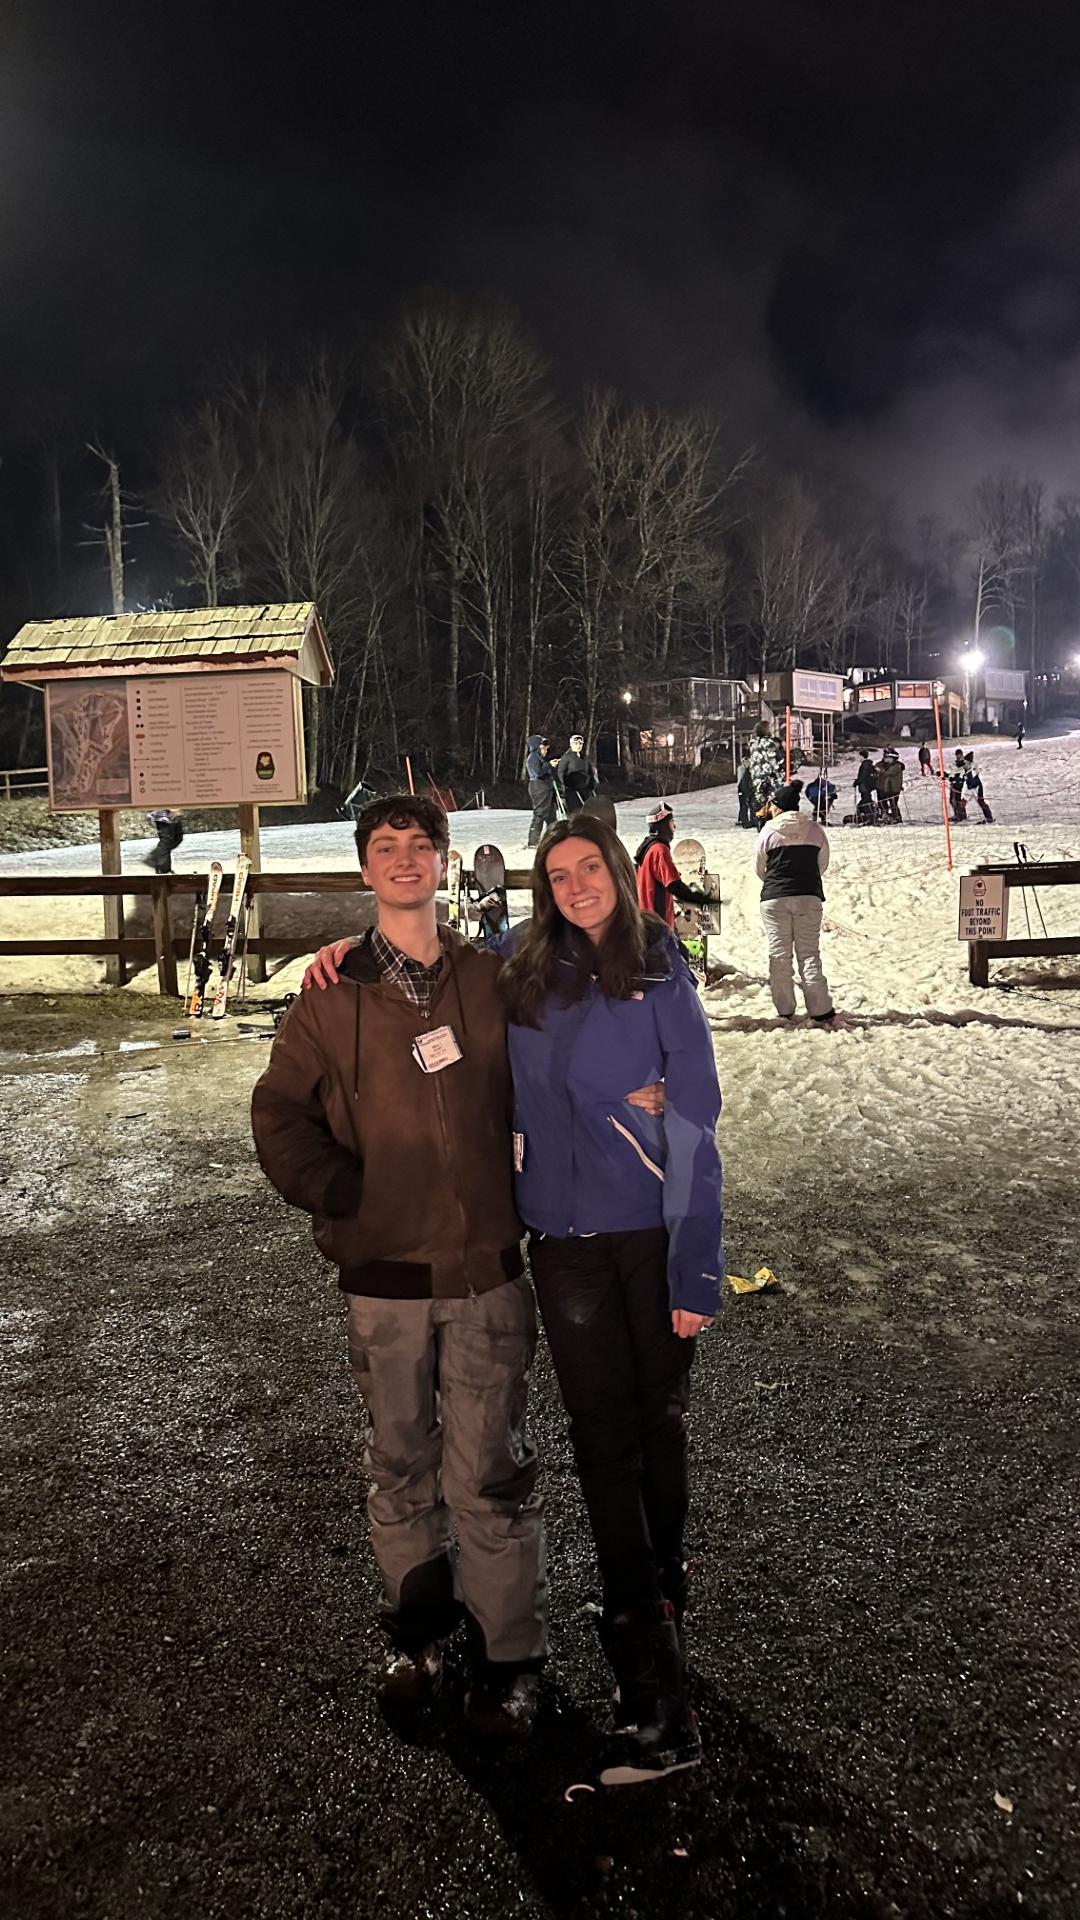 Two people are smiling in the foreground at a snowy night-time ski resort, with skiers, a lift, and a well-lit lodge in the background.